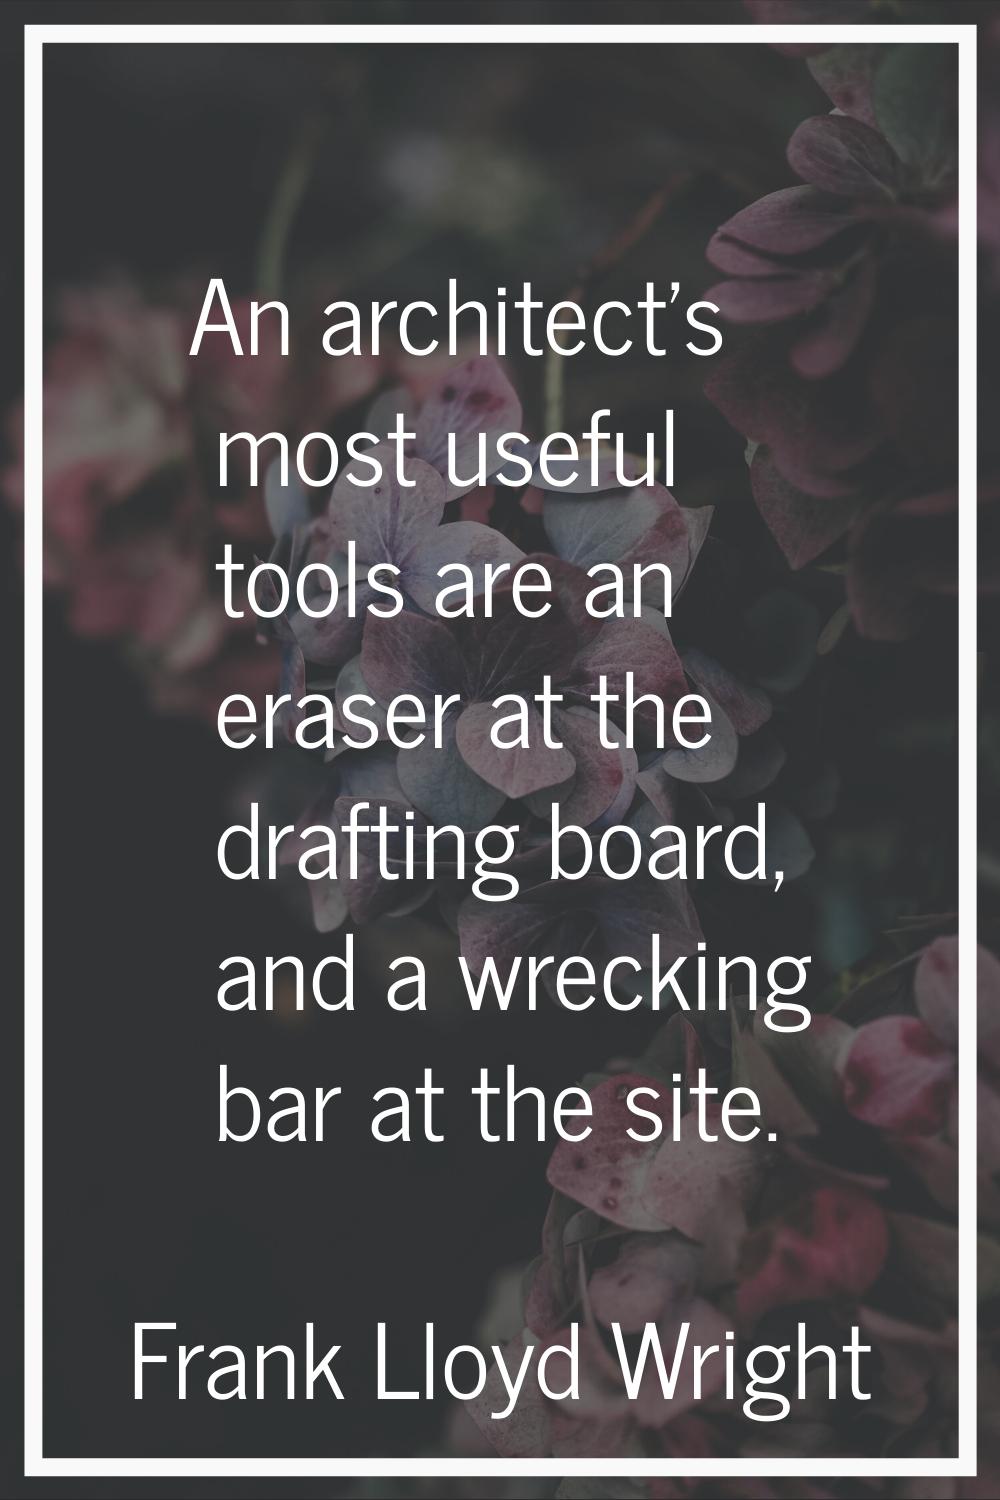 An architect's most useful tools are an eraser at the drafting board, and a wrecking bar at the sit